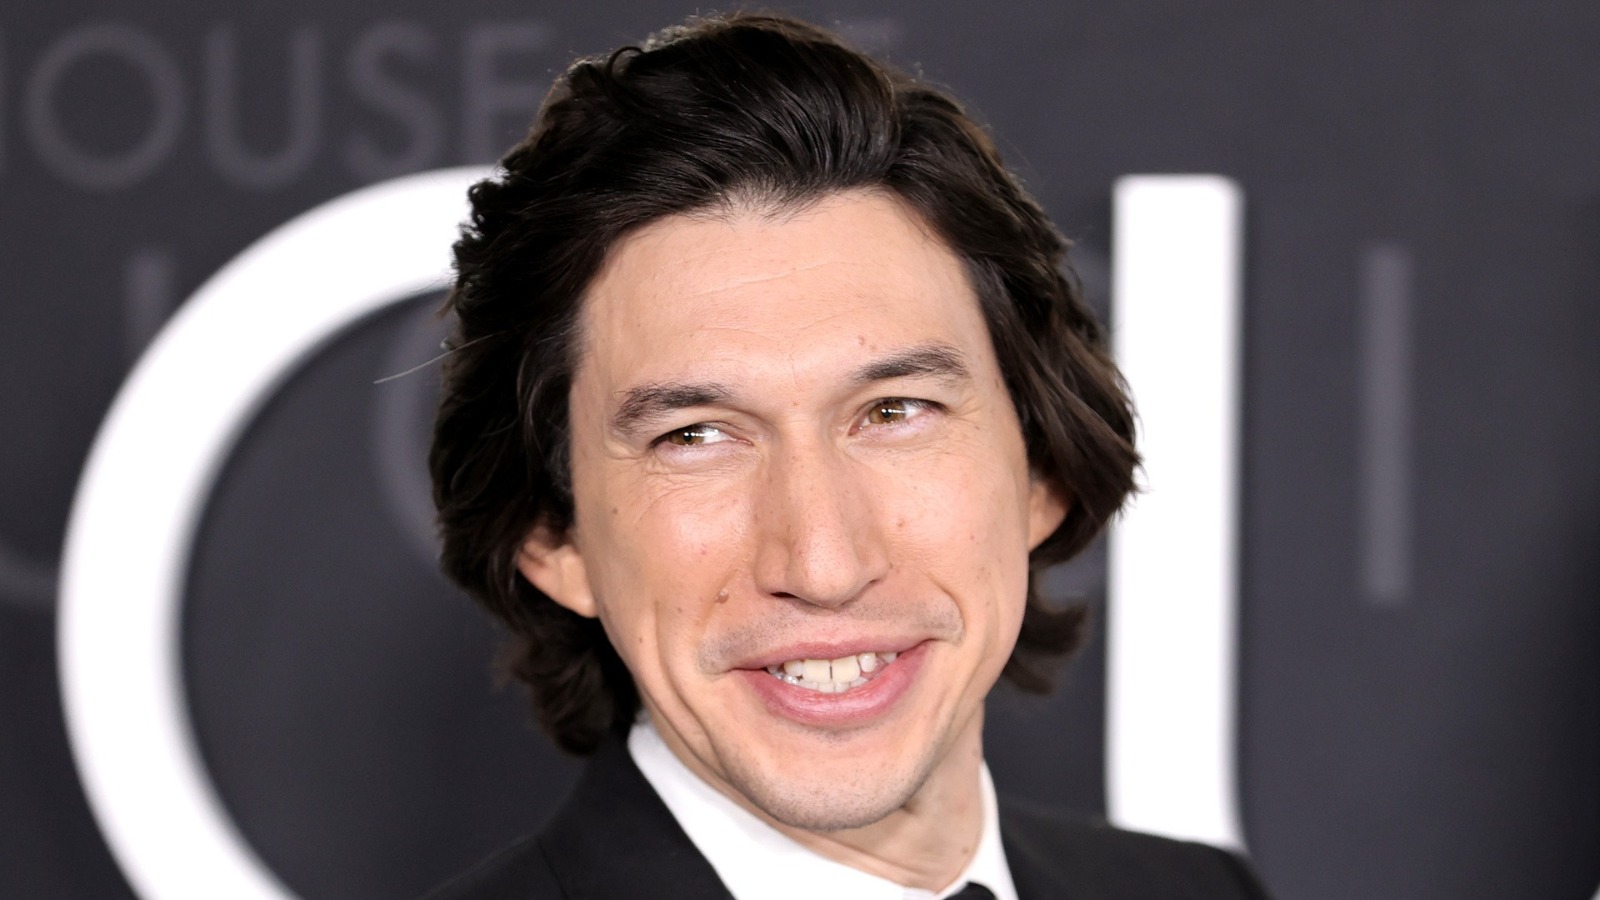 Adam Driver’s ‘success at such a young age’ stirs up a hornet’s nest